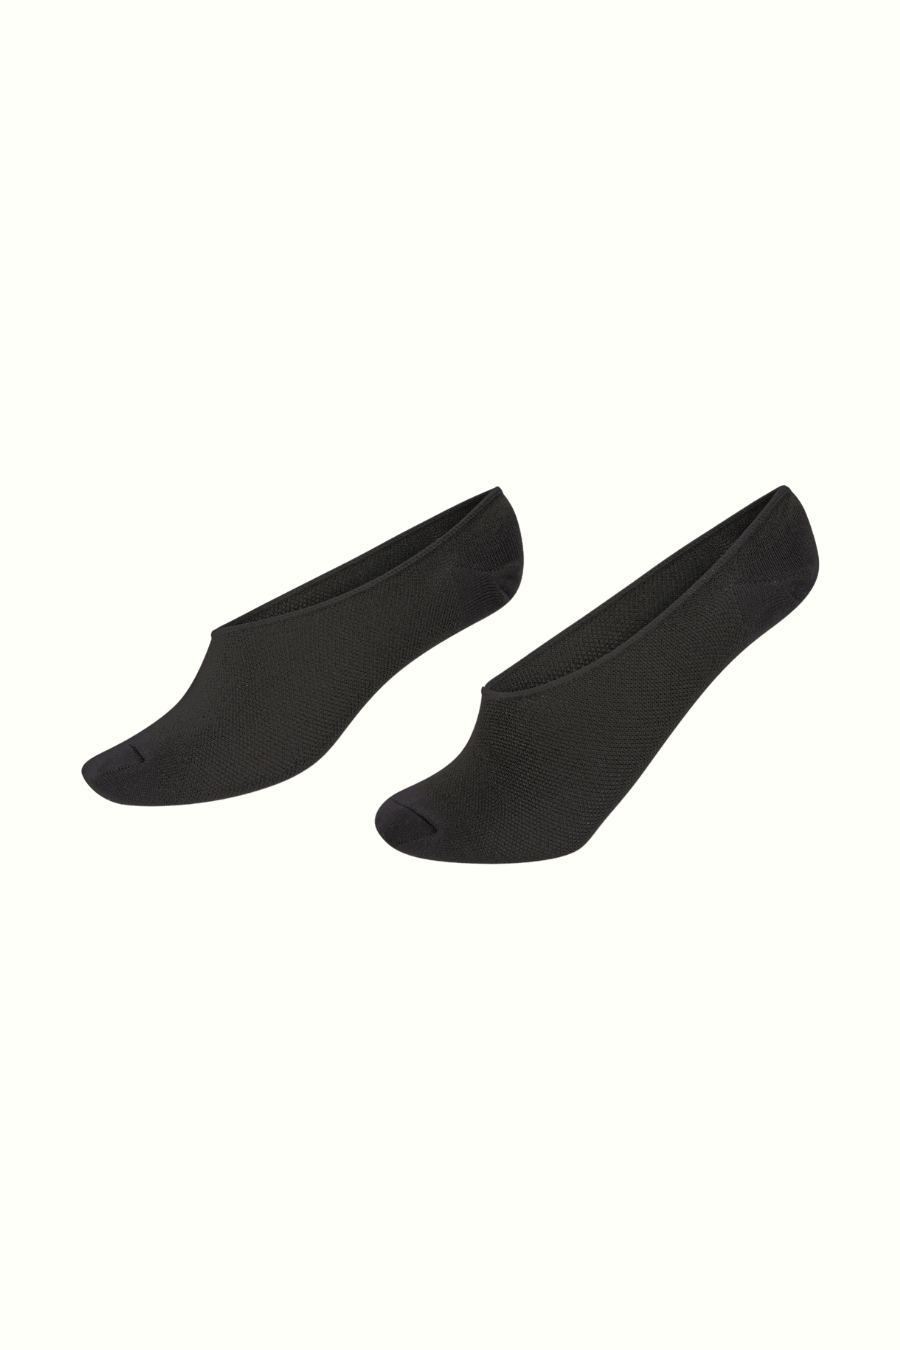 Why No-Show Socks Slip & How to Keep Them On